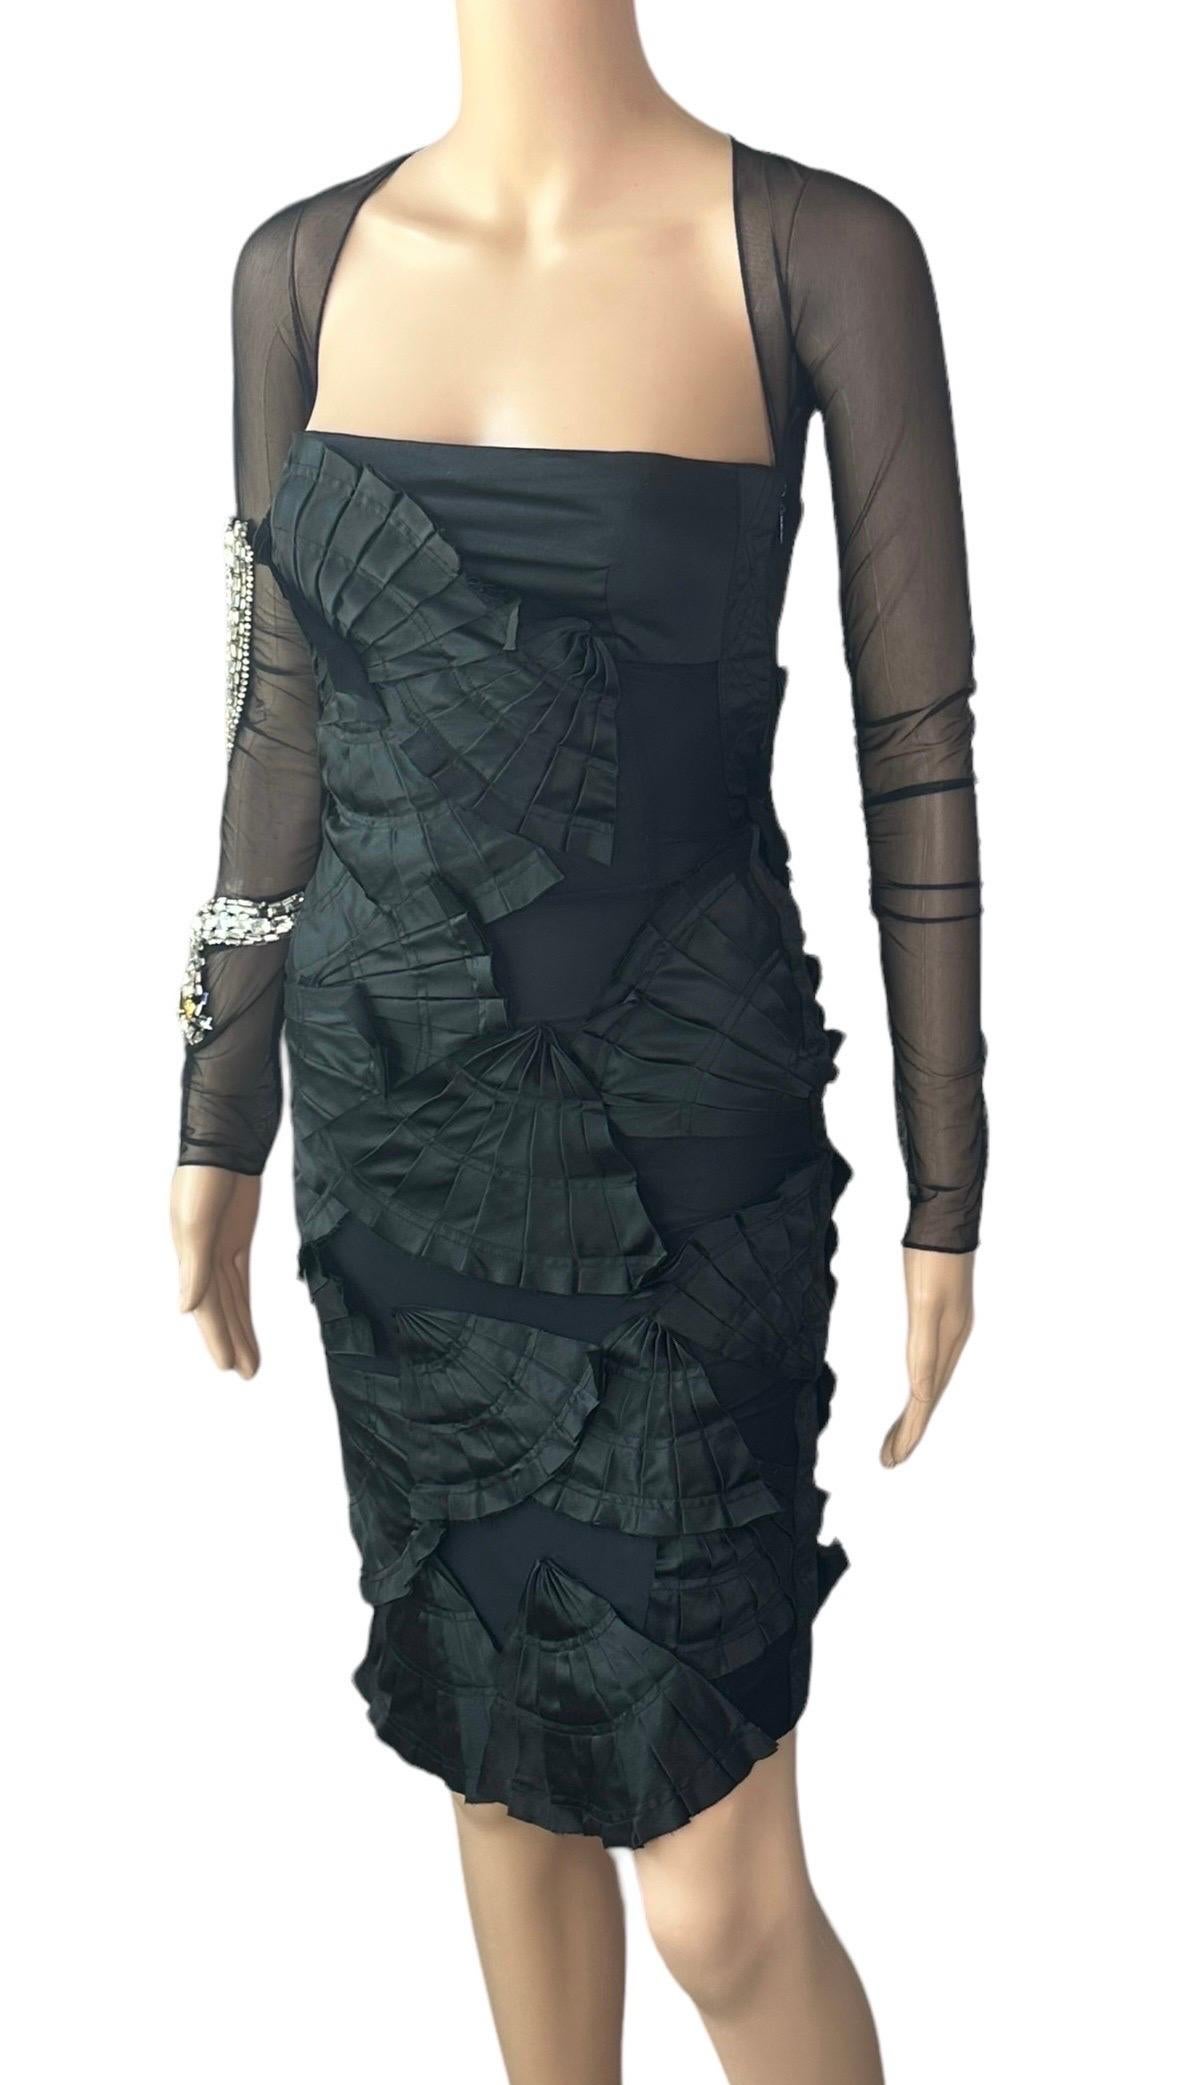 Tom Ford for Gucci S/S 2004 Runway Embellished Snake Sheer Cutout Back Black Dress IT 40

Look 39 from the Spring 2004 Collection

Condition: pulls throughout the sheer mesh sleeves that have been repaired caused due to heavy crystal embellishments